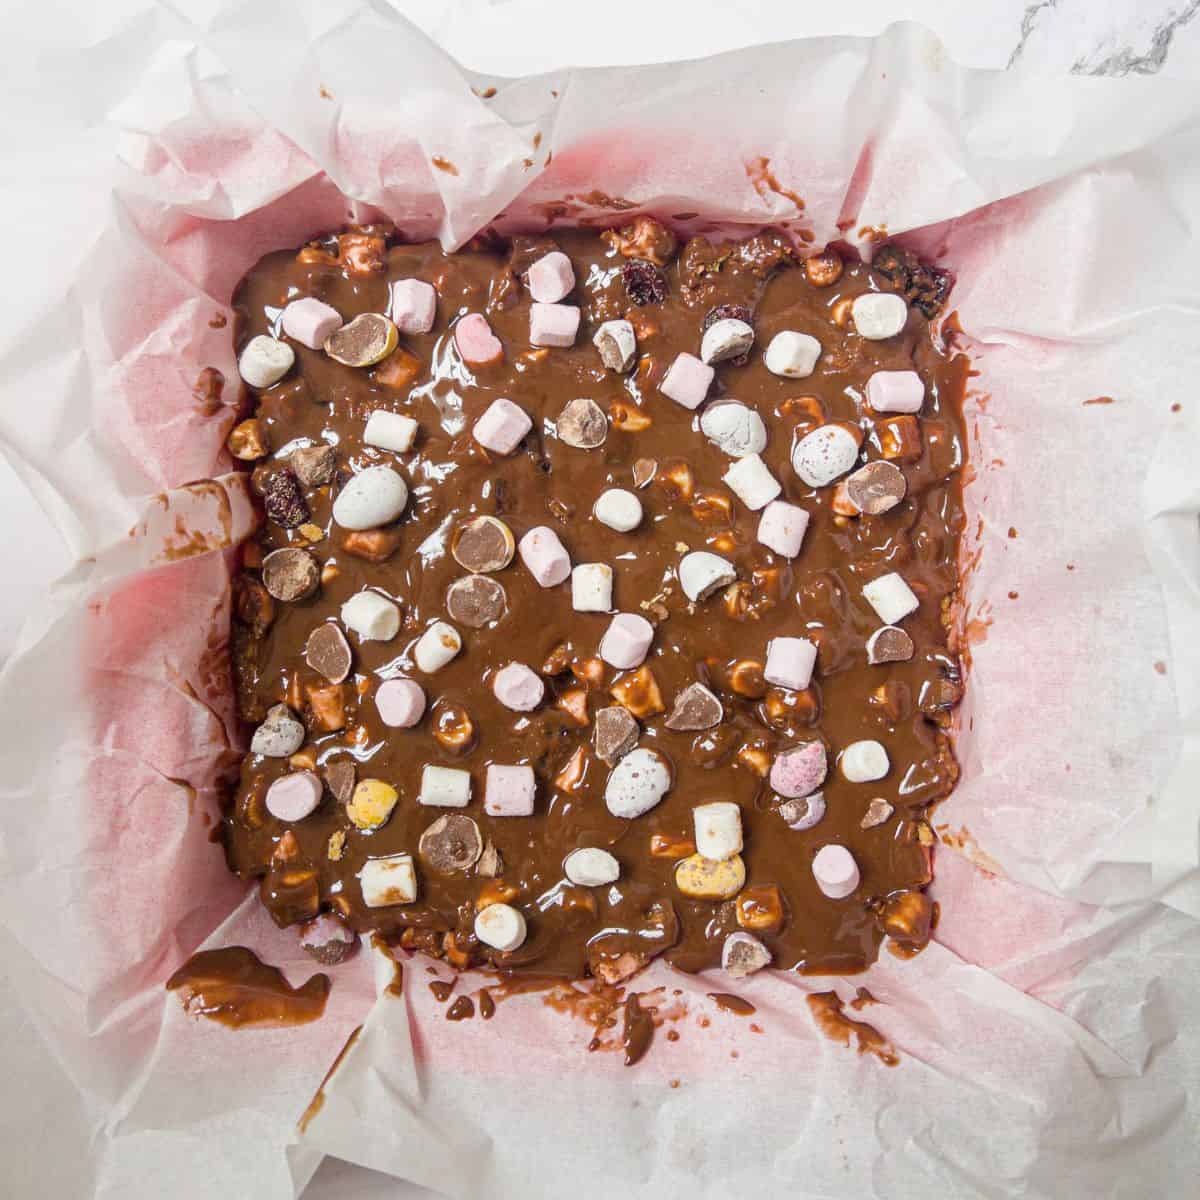 Un-set rocky road mix topped with marshmallows and mini eggs in a greaseproof paper lined baking tin.